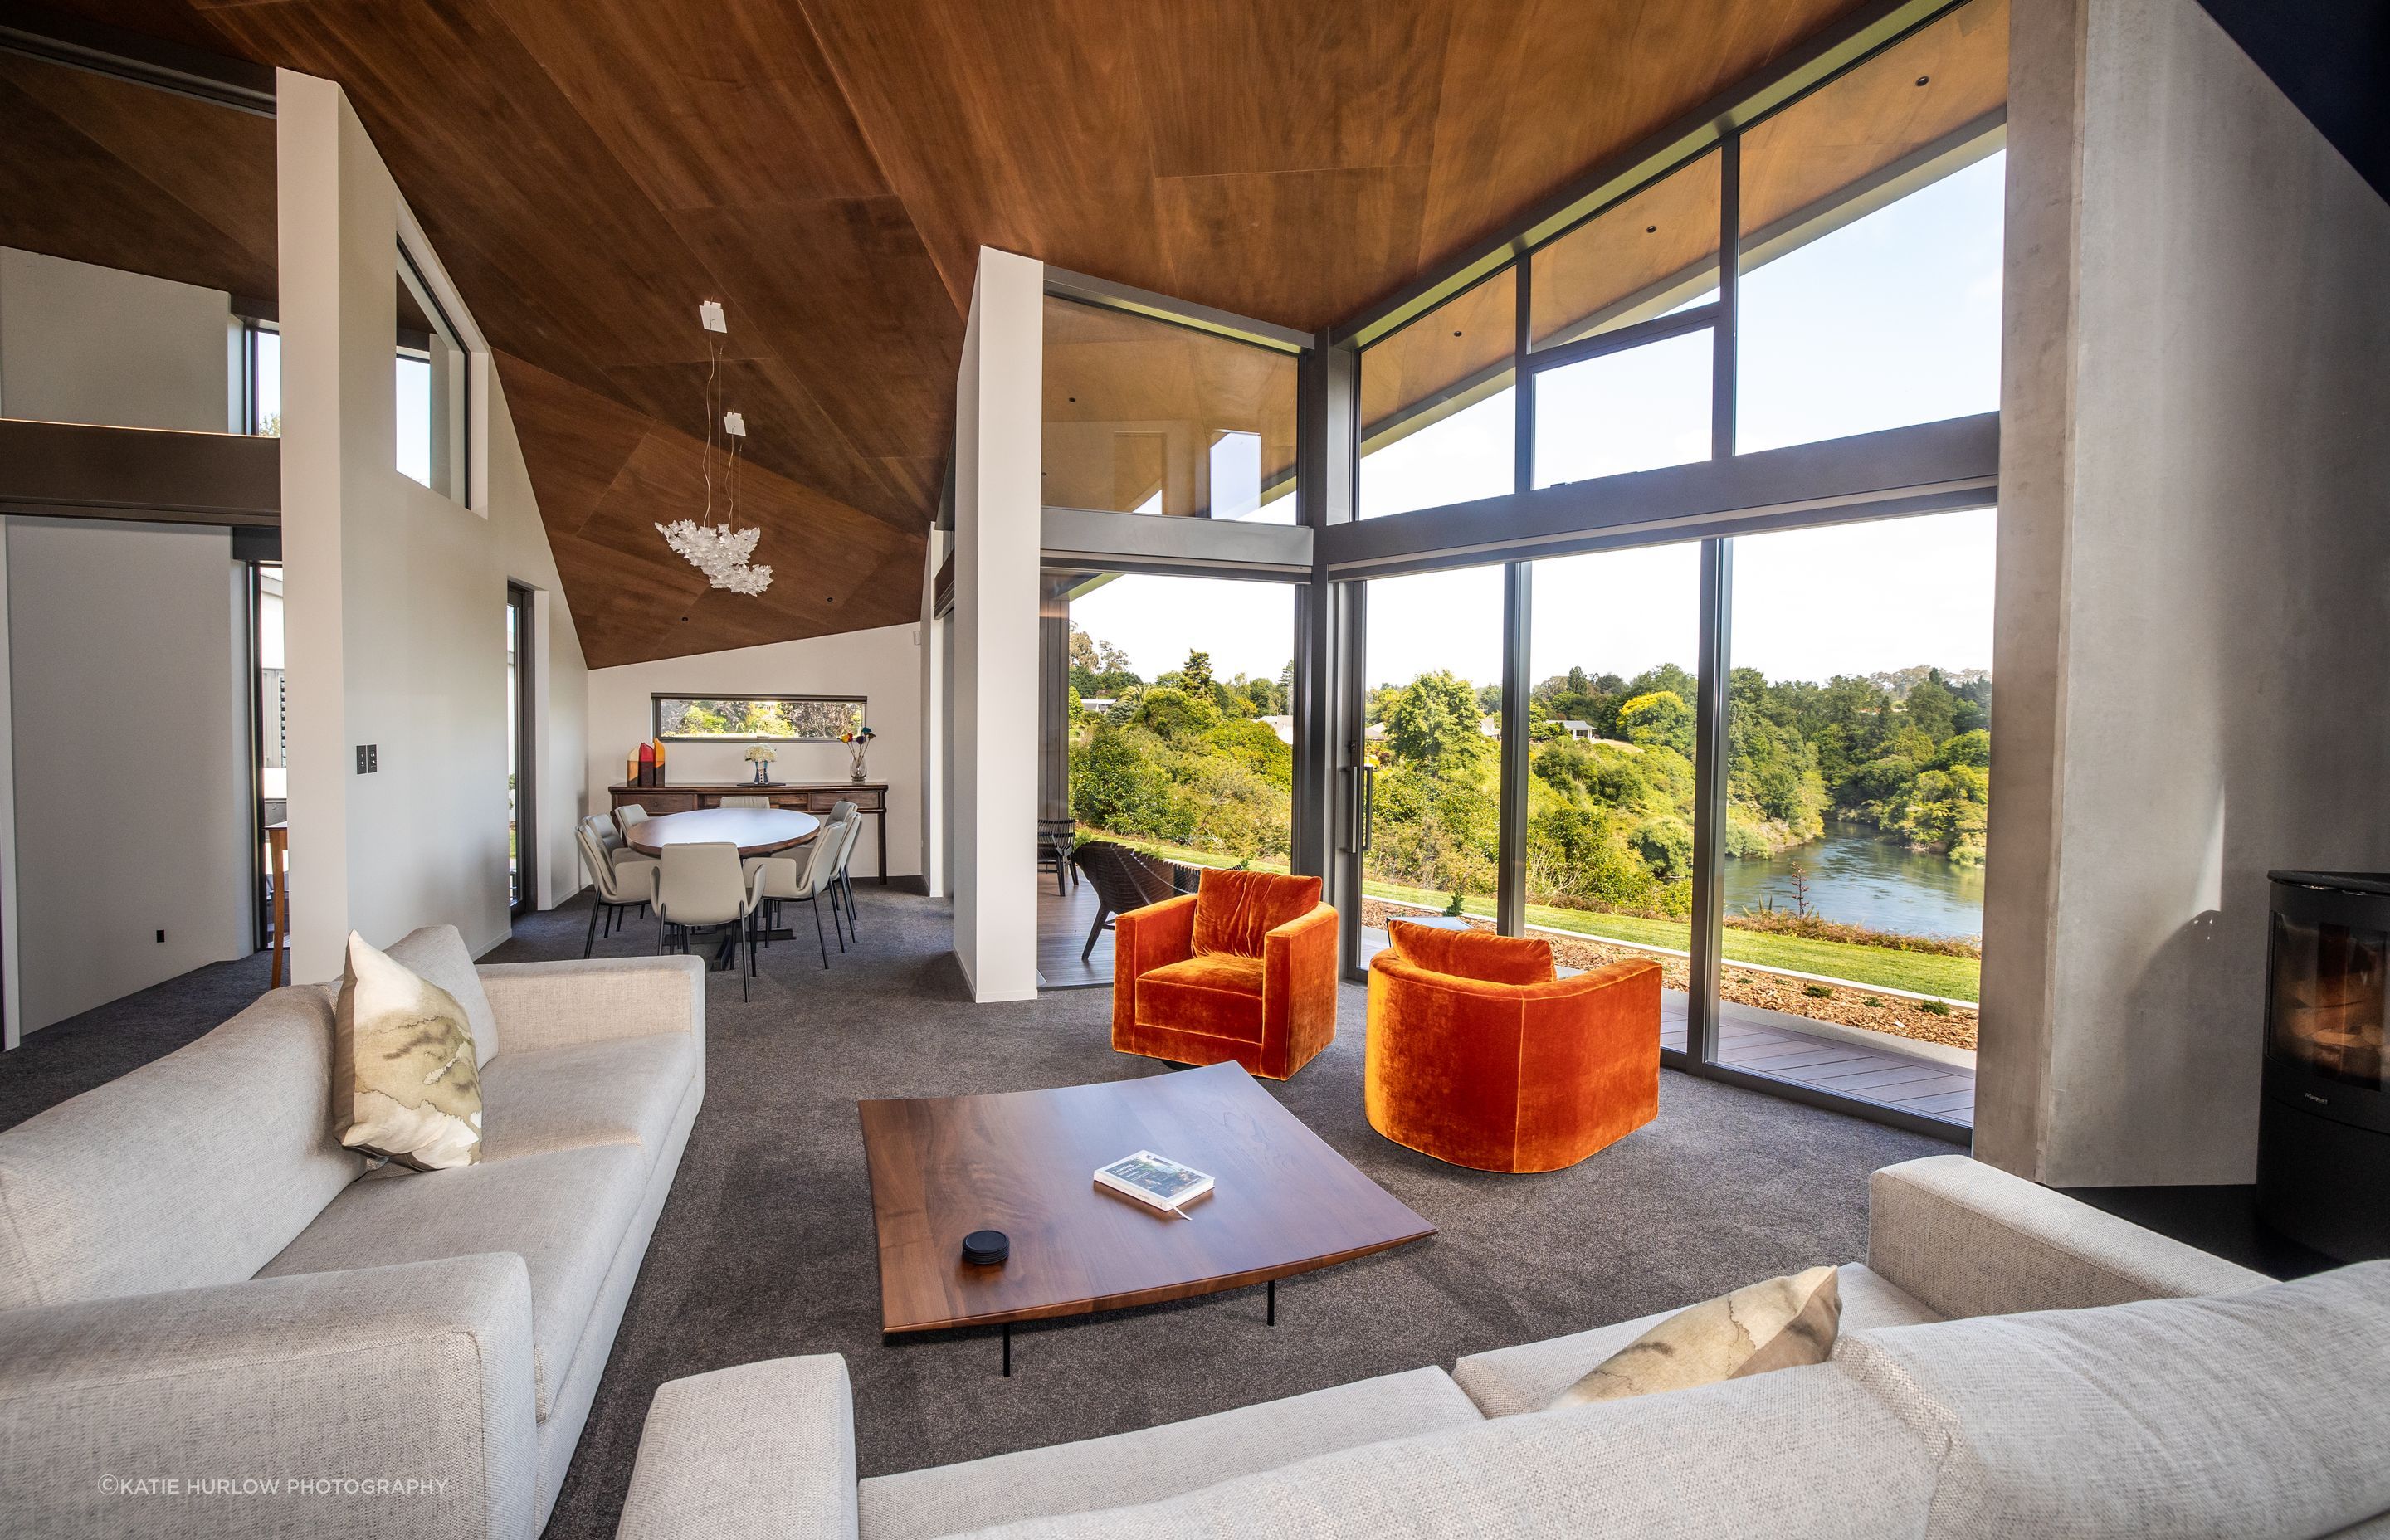 The lounge takes in stunning views of the river, while the timber lined ceiling angles down into a dining space.